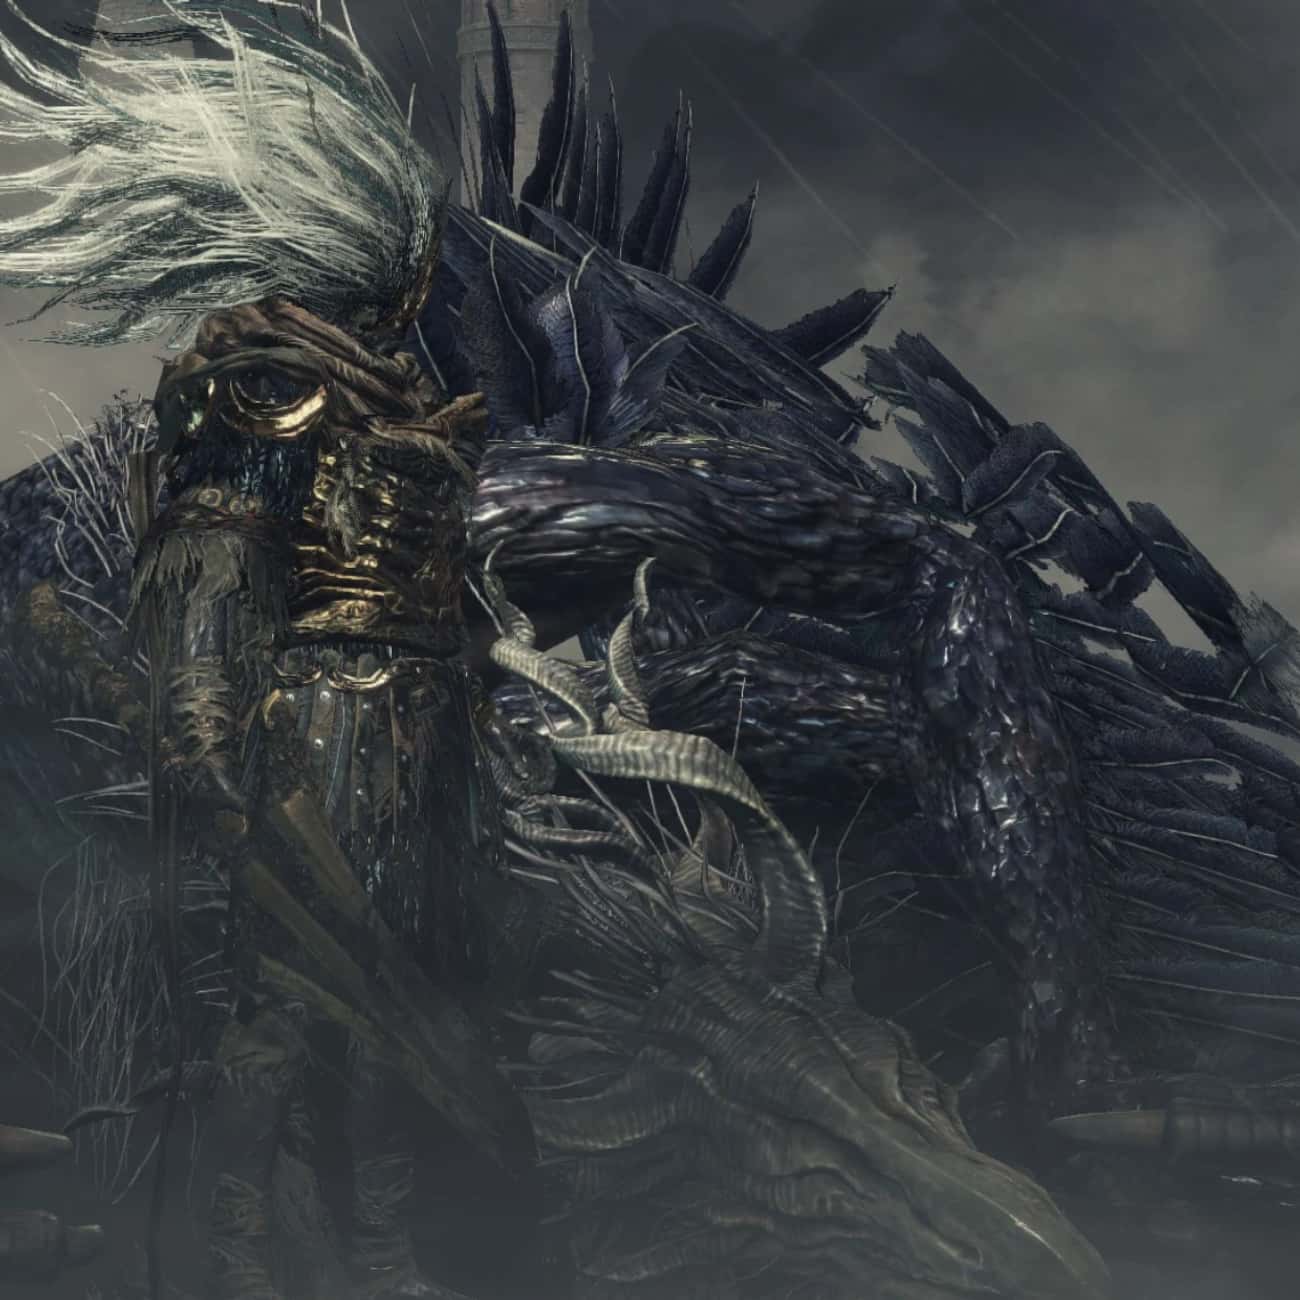 The Nameless King & King of the Storm